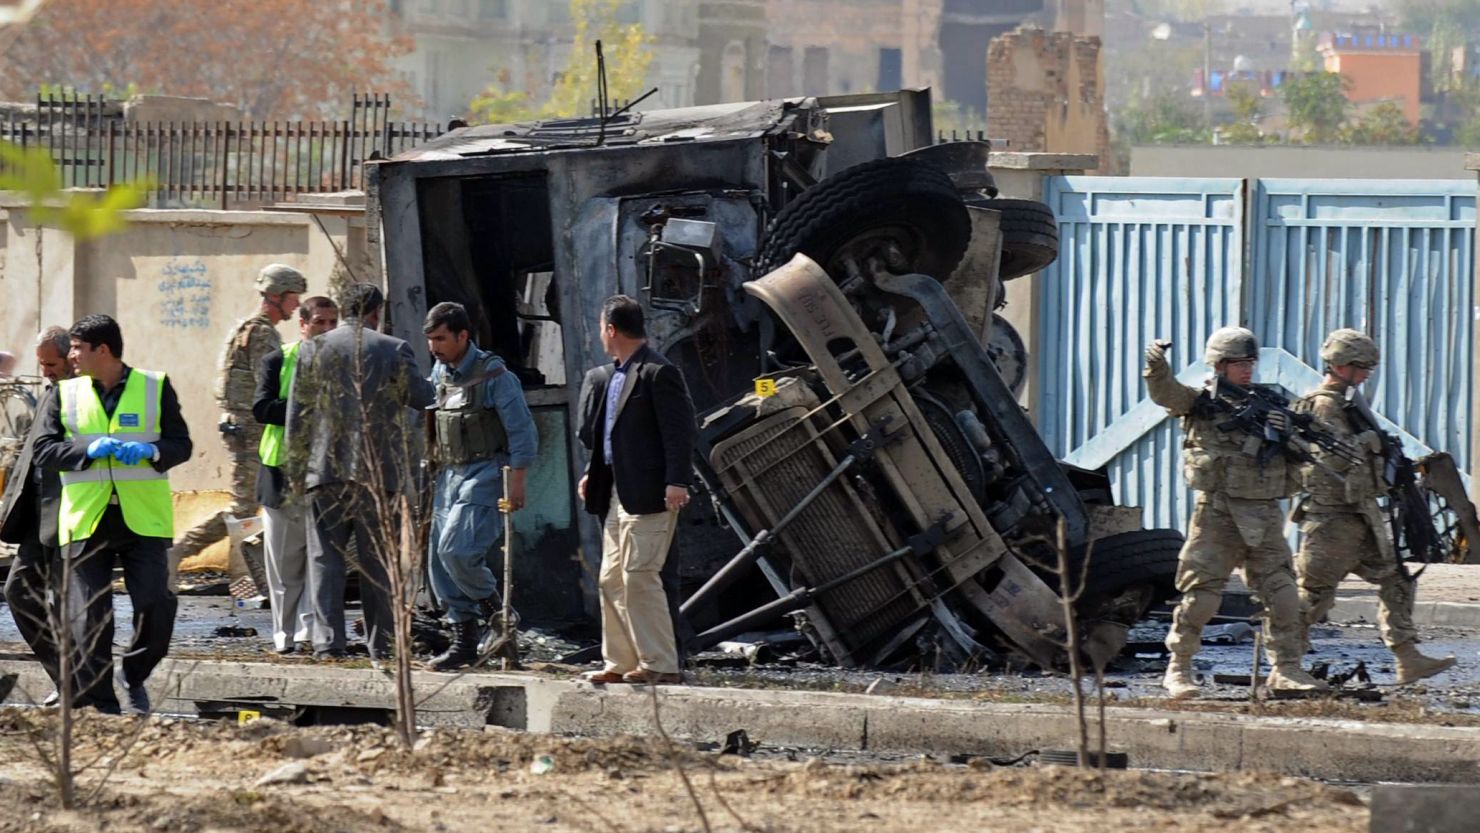 Afghan security forces and NATO troops inspect the site of a suicide attack in Kabul on Saturday.